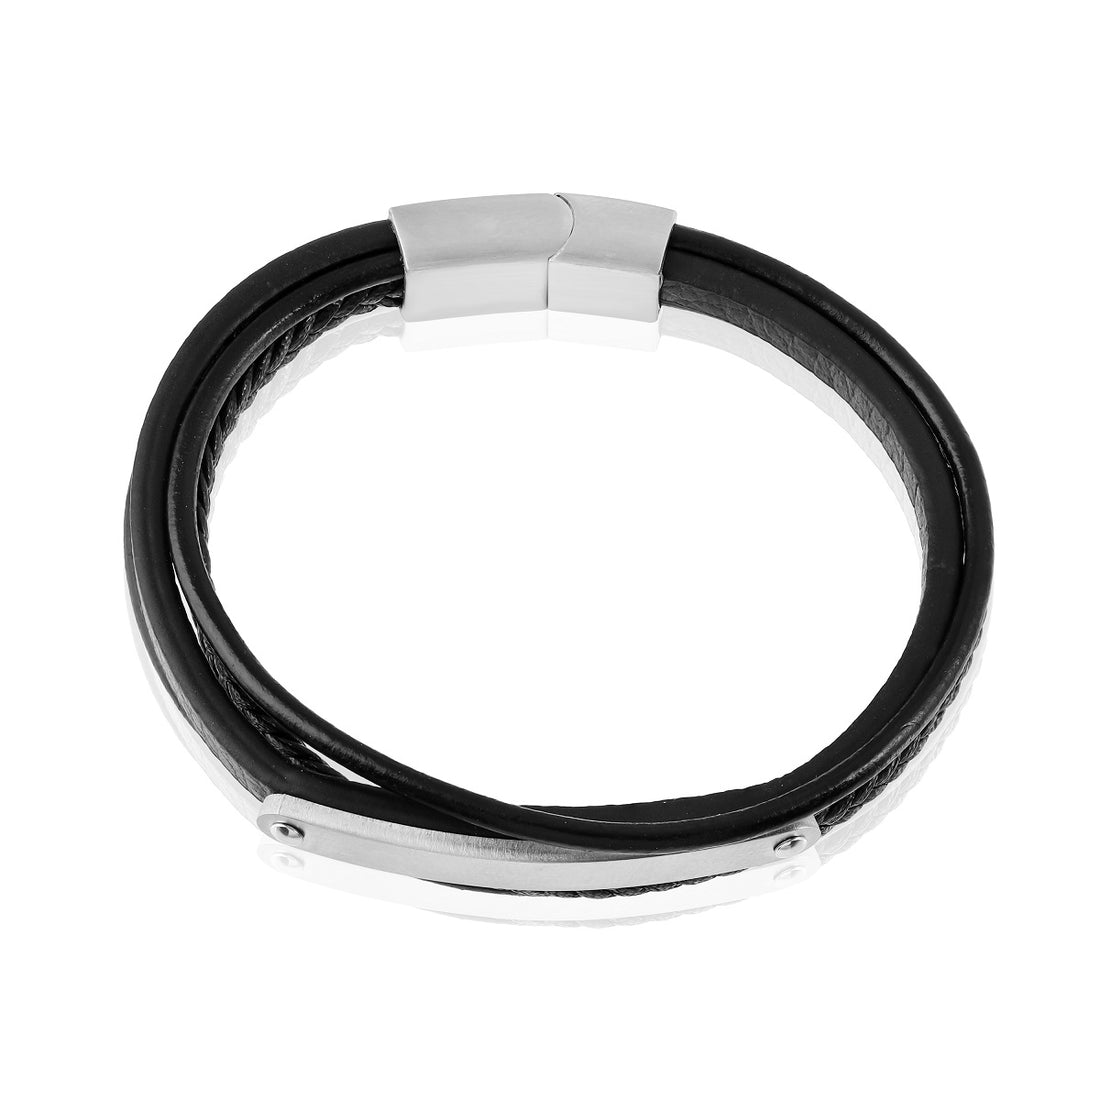 Stainless Steel Multi Layer Black Leather Bracelet, showcasing multiple layers of leather and stainless steel